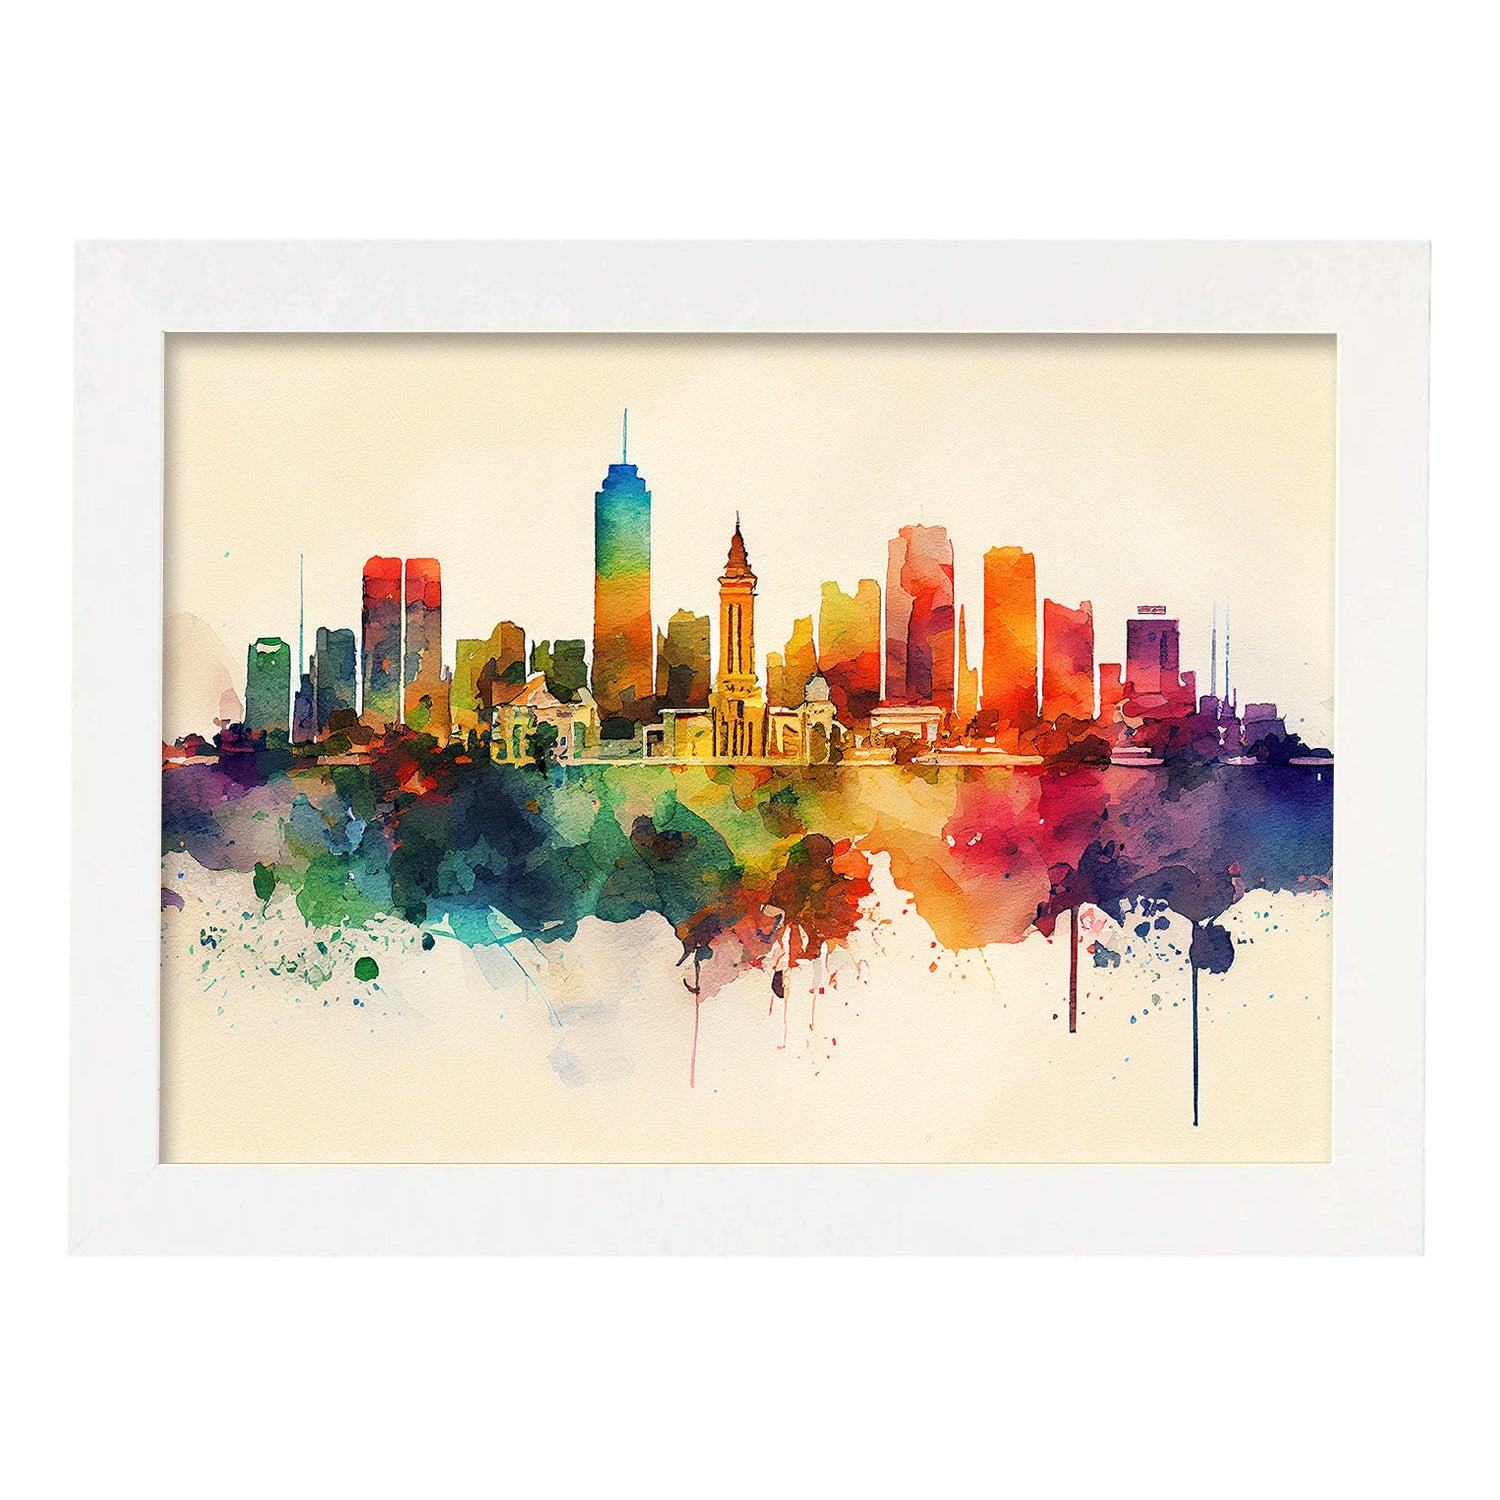 Nacnic watercolor of a skyline of the city of Manila_2. Aesthetic Wall Art Prints for Bedroom or Living Room Design.-Artwork-Nacnic-A4-Marco Blanco-Nacnic Estudio SL